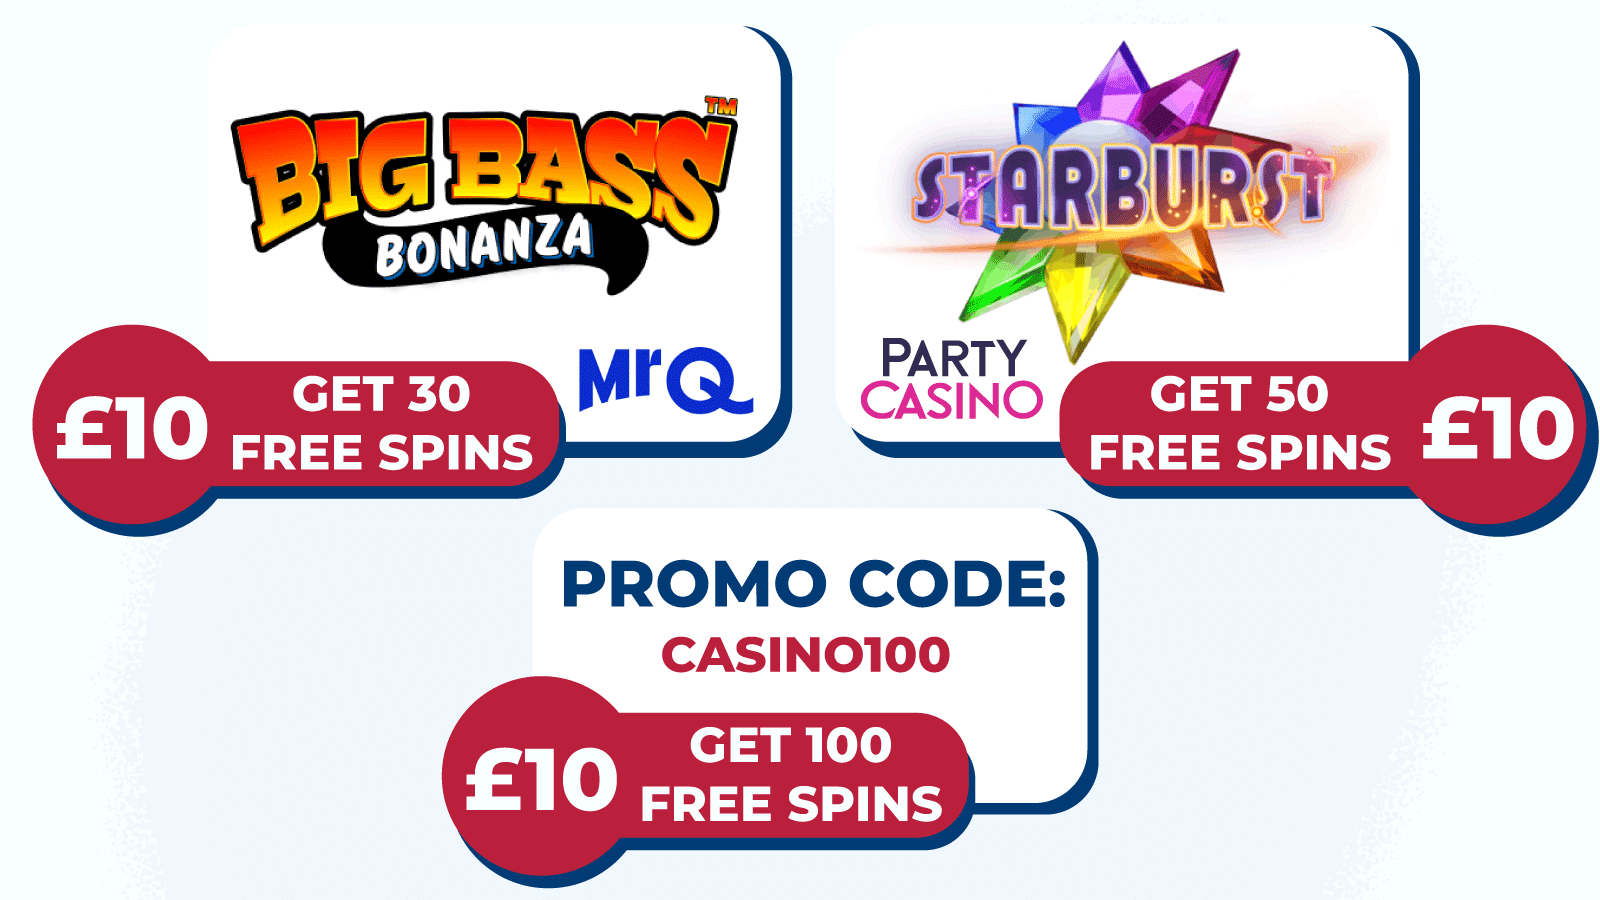 Free Spins for £10